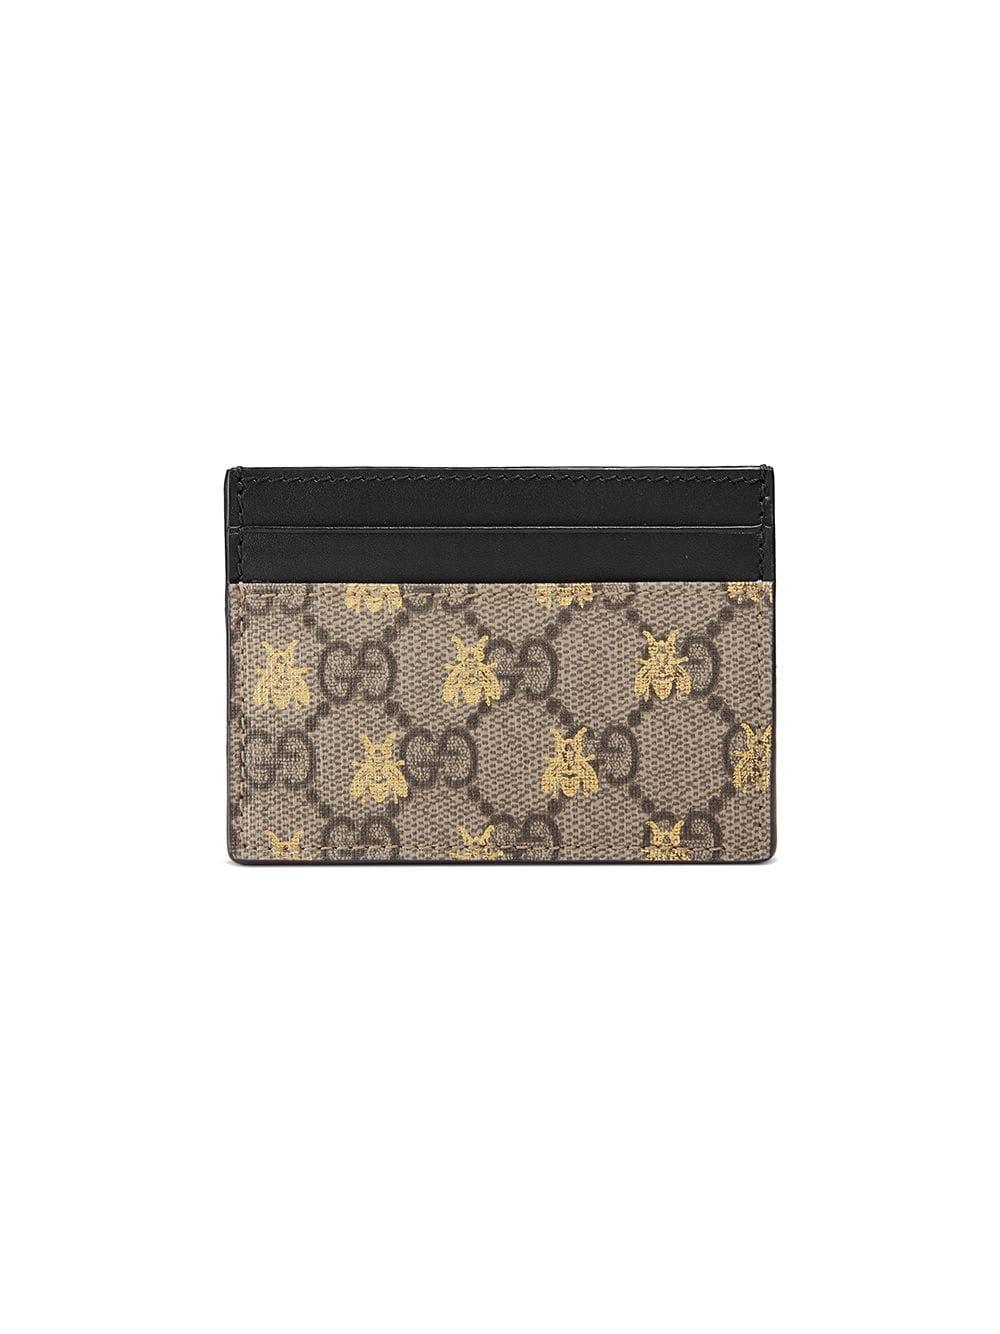 Gucci GG Supreme Bees Card Case | Lyst